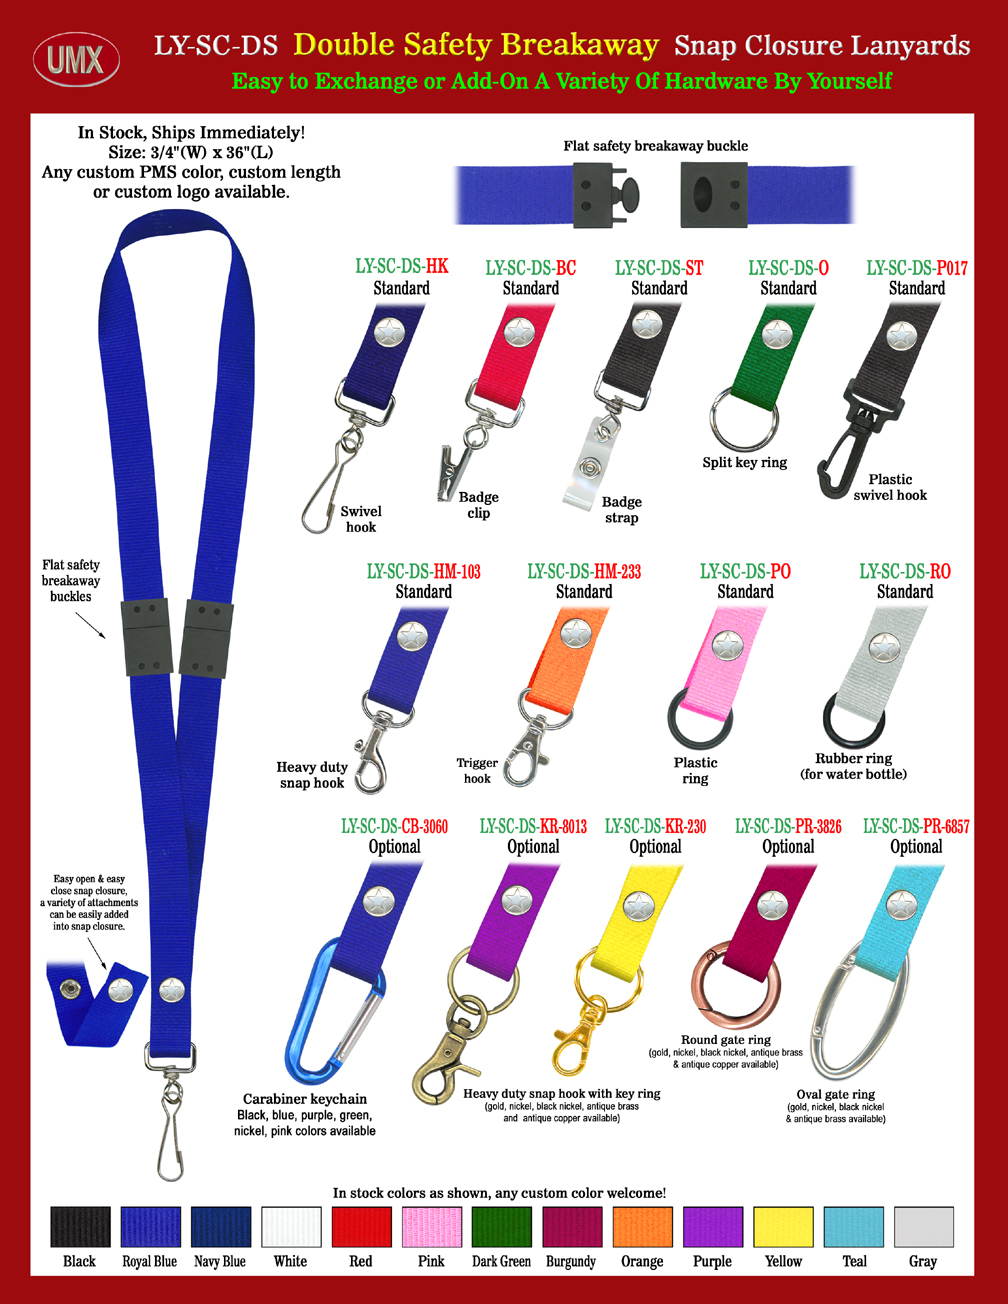 Dual Safety Snap-On Neck Lanyards With Two Safety Breakaway Protection - 3/4" Two Safety Breakaway Lanyards With Double Protection.